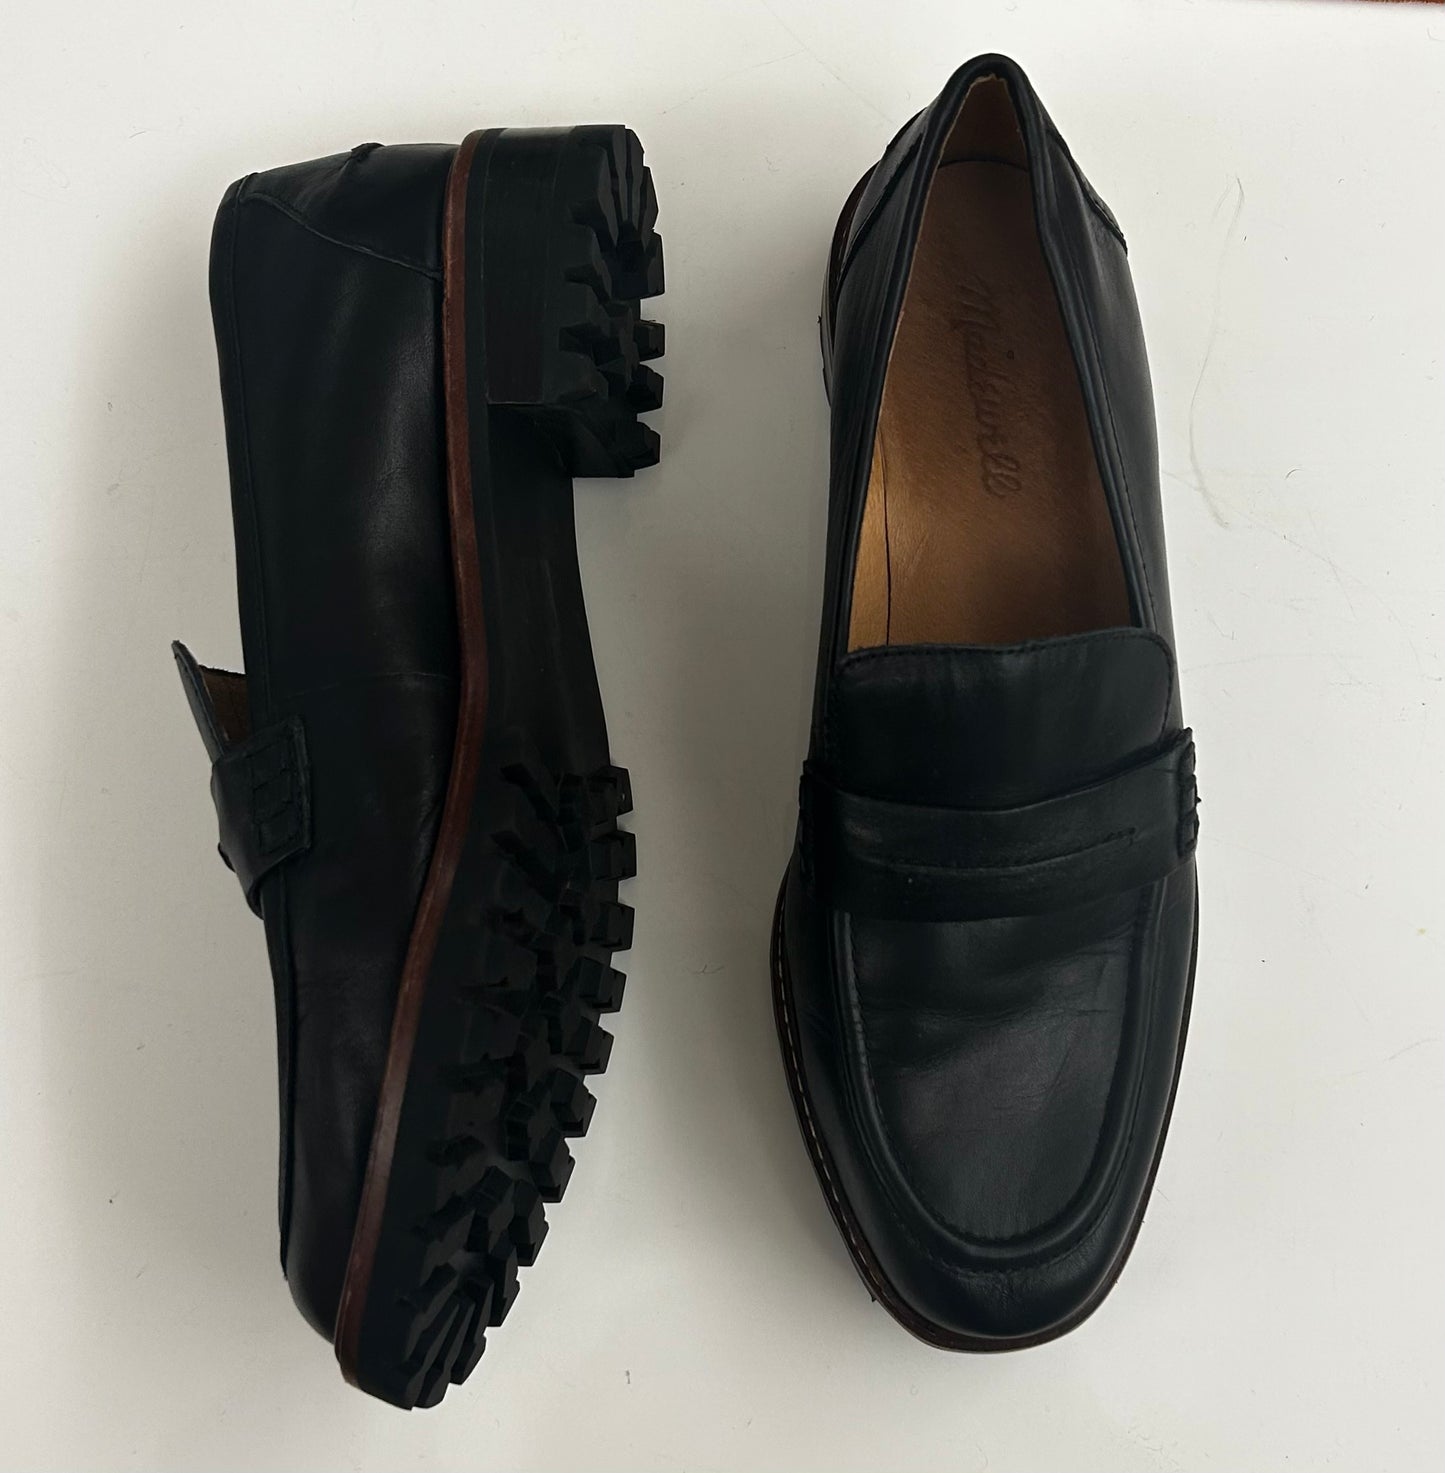 Madewell loafers - Q1